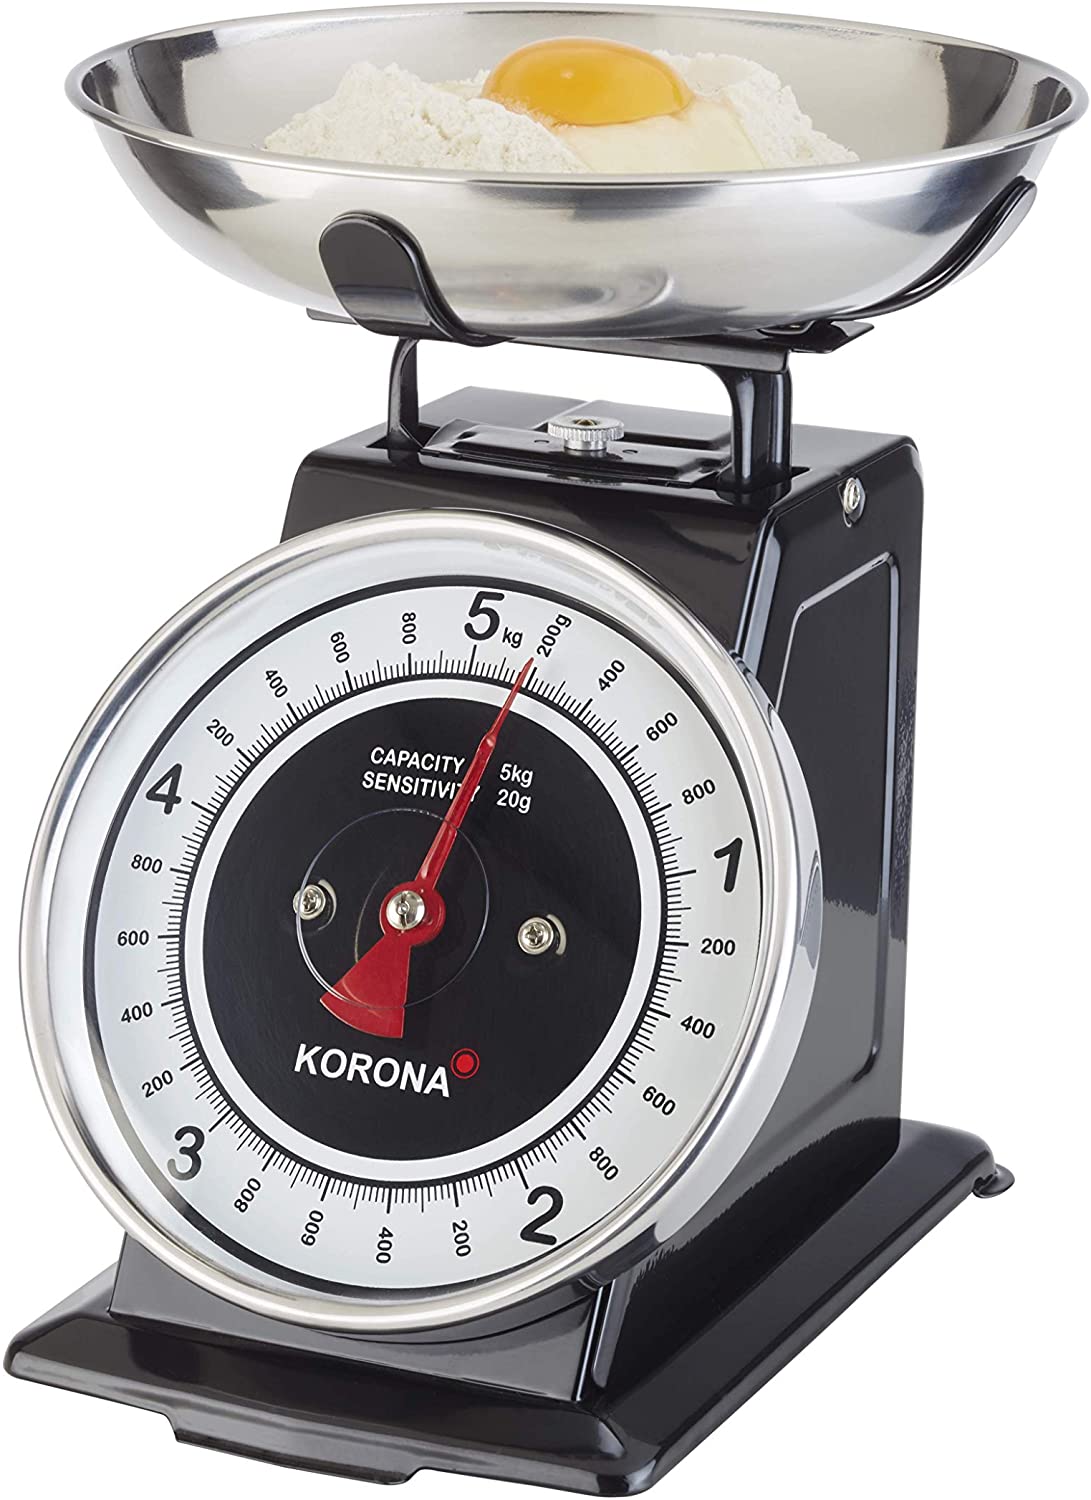 Korona Tom 76150 Retro Kitchen Scales | Maximum Load 5 kg | 20 g Scale | Includes Weighing Bowl | Tare - Tare Function | Large Full View Scale